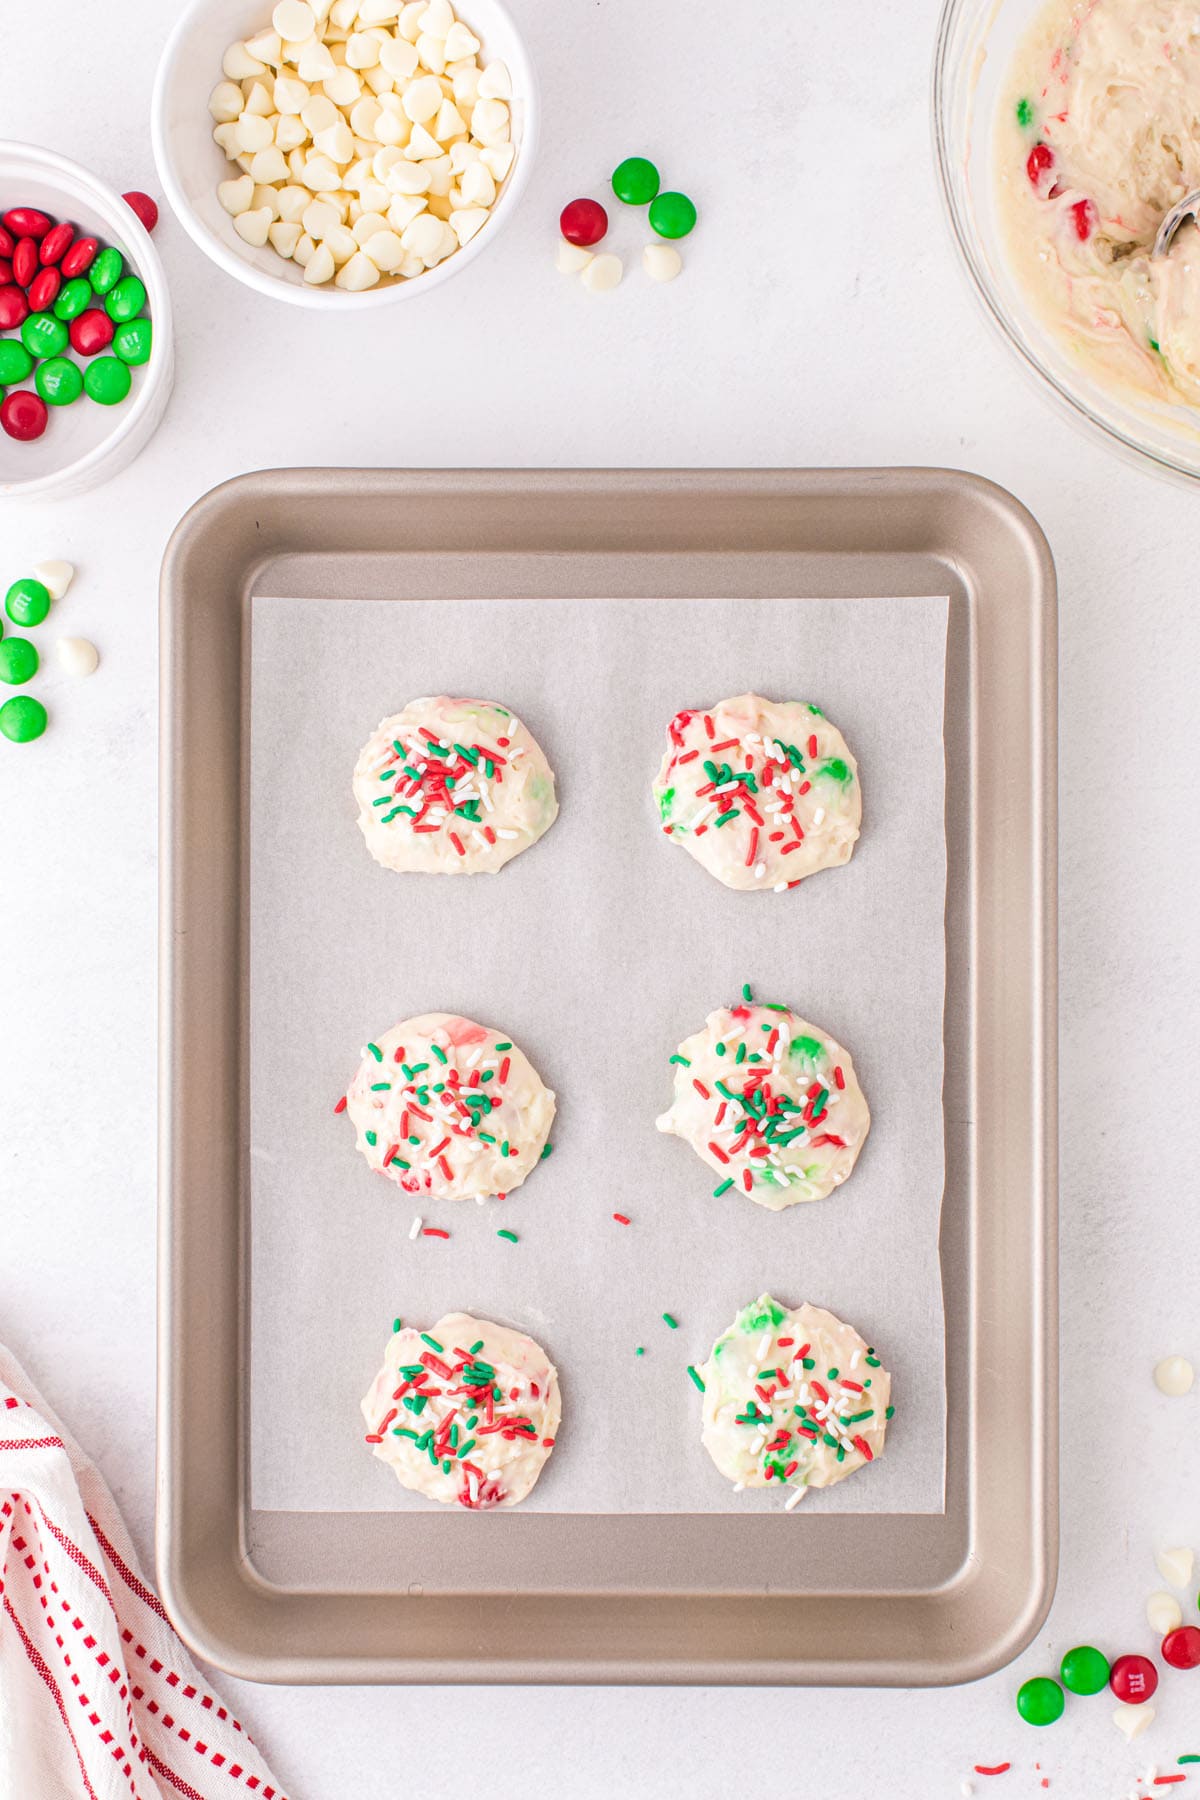 Scoop cookie dough onto sheet pans and coat the top of each cookie with sprinkles